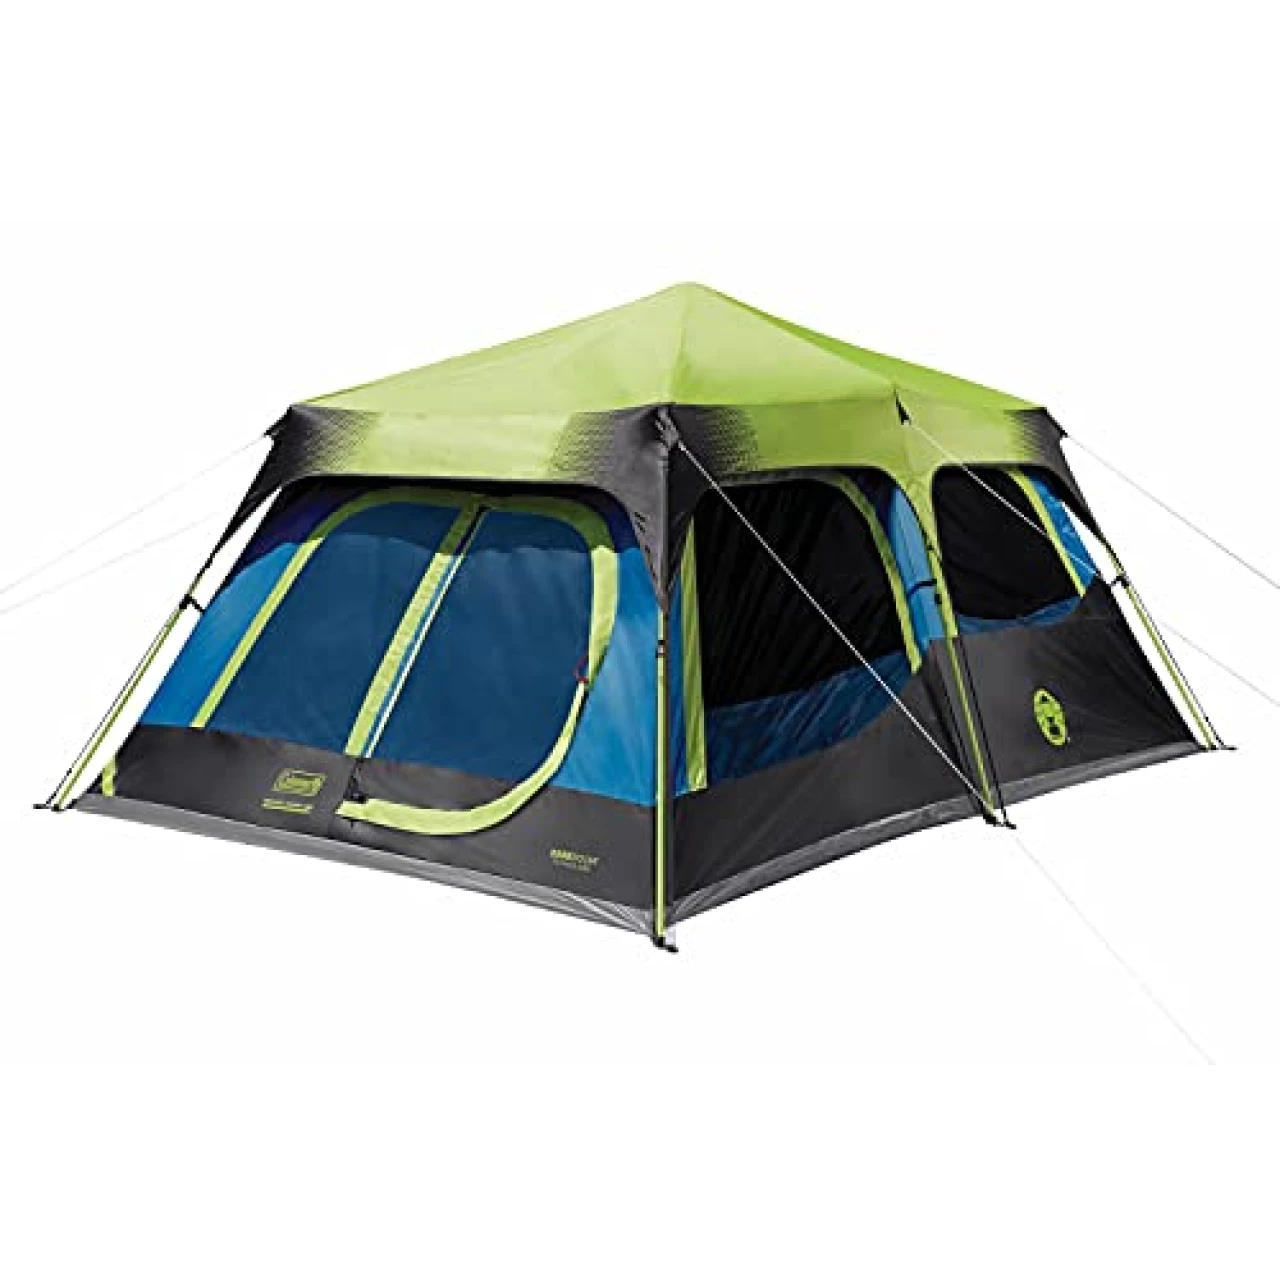 Coleman Camping Tent with Instant Setup, 4/6/8/10 Person Weatherproof Tent with Weathertec Technology, Double-Thick Fabric, and Included Carry Bag